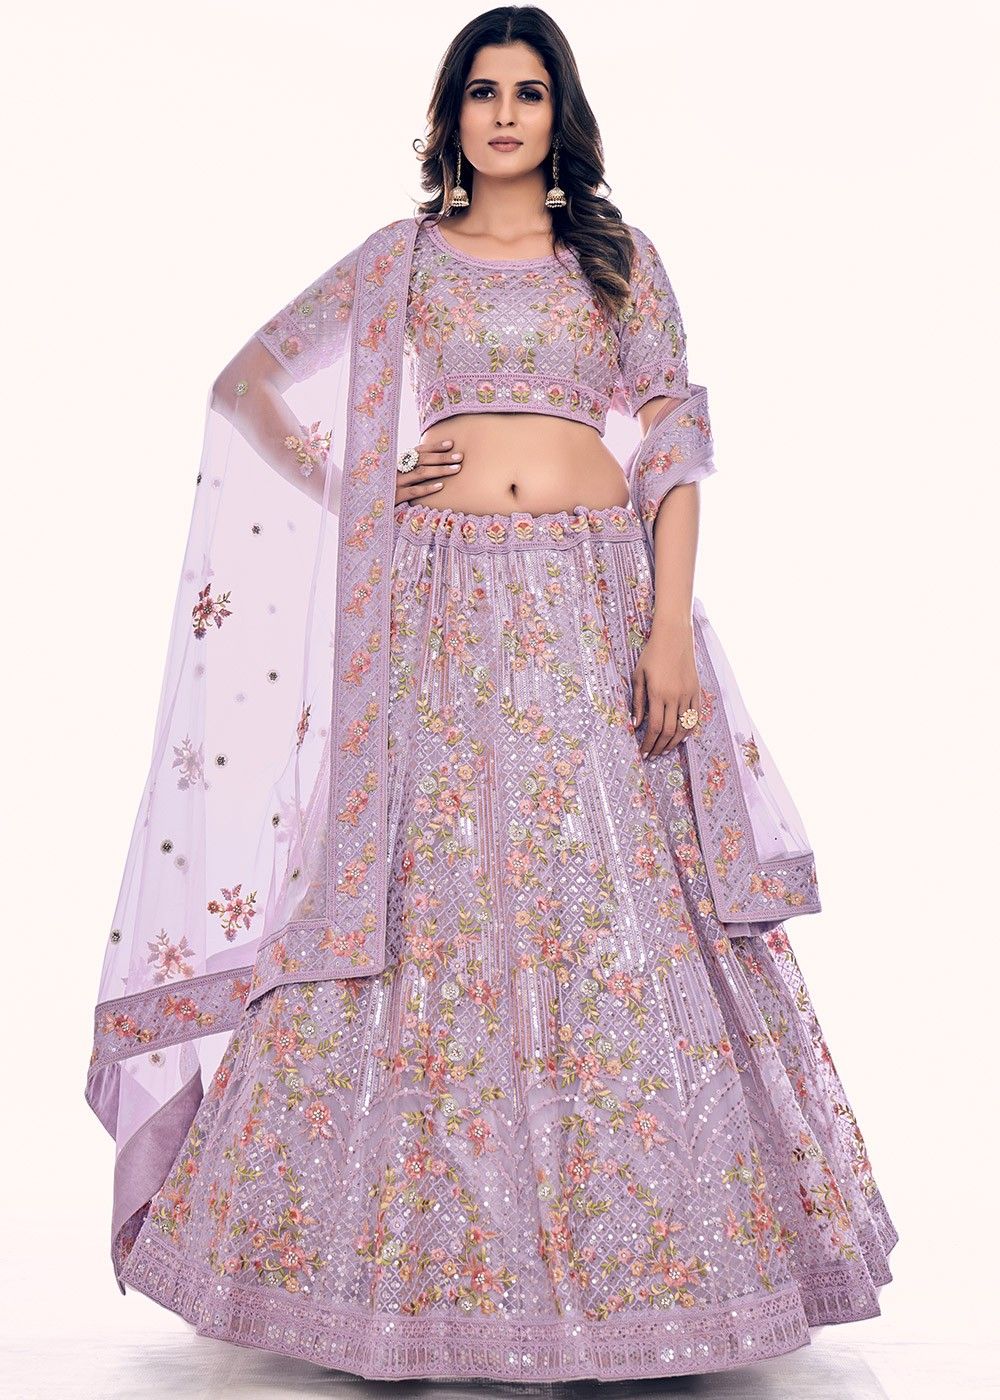 Net Party Wear Lehenga Choli, Size : Upto 46 Inches, Color : Golden at Rs  7,999 / Piece in Surat